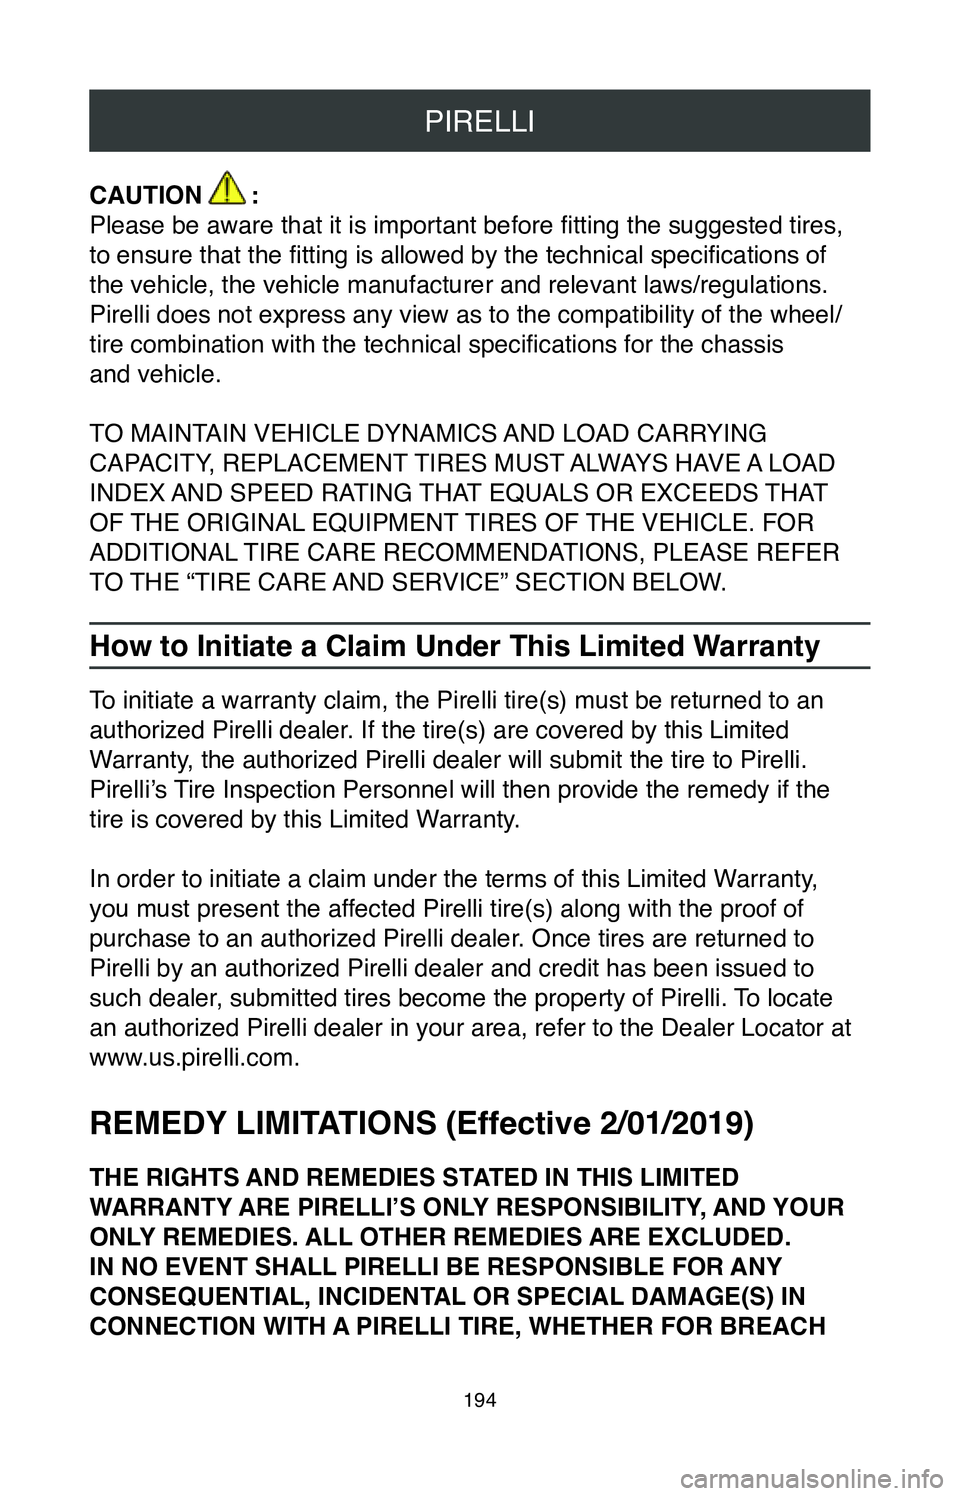 TOYOTA AVALON HYBRID 2020  Warranties & Maintenance Guides (in English) PIRELLI
194
CAUTION       :
Please be aware that it is important before fitting the suggested tires, 
to ensure that the fitting is allowed by the technical specifications of  
the vehicle, the vehicl